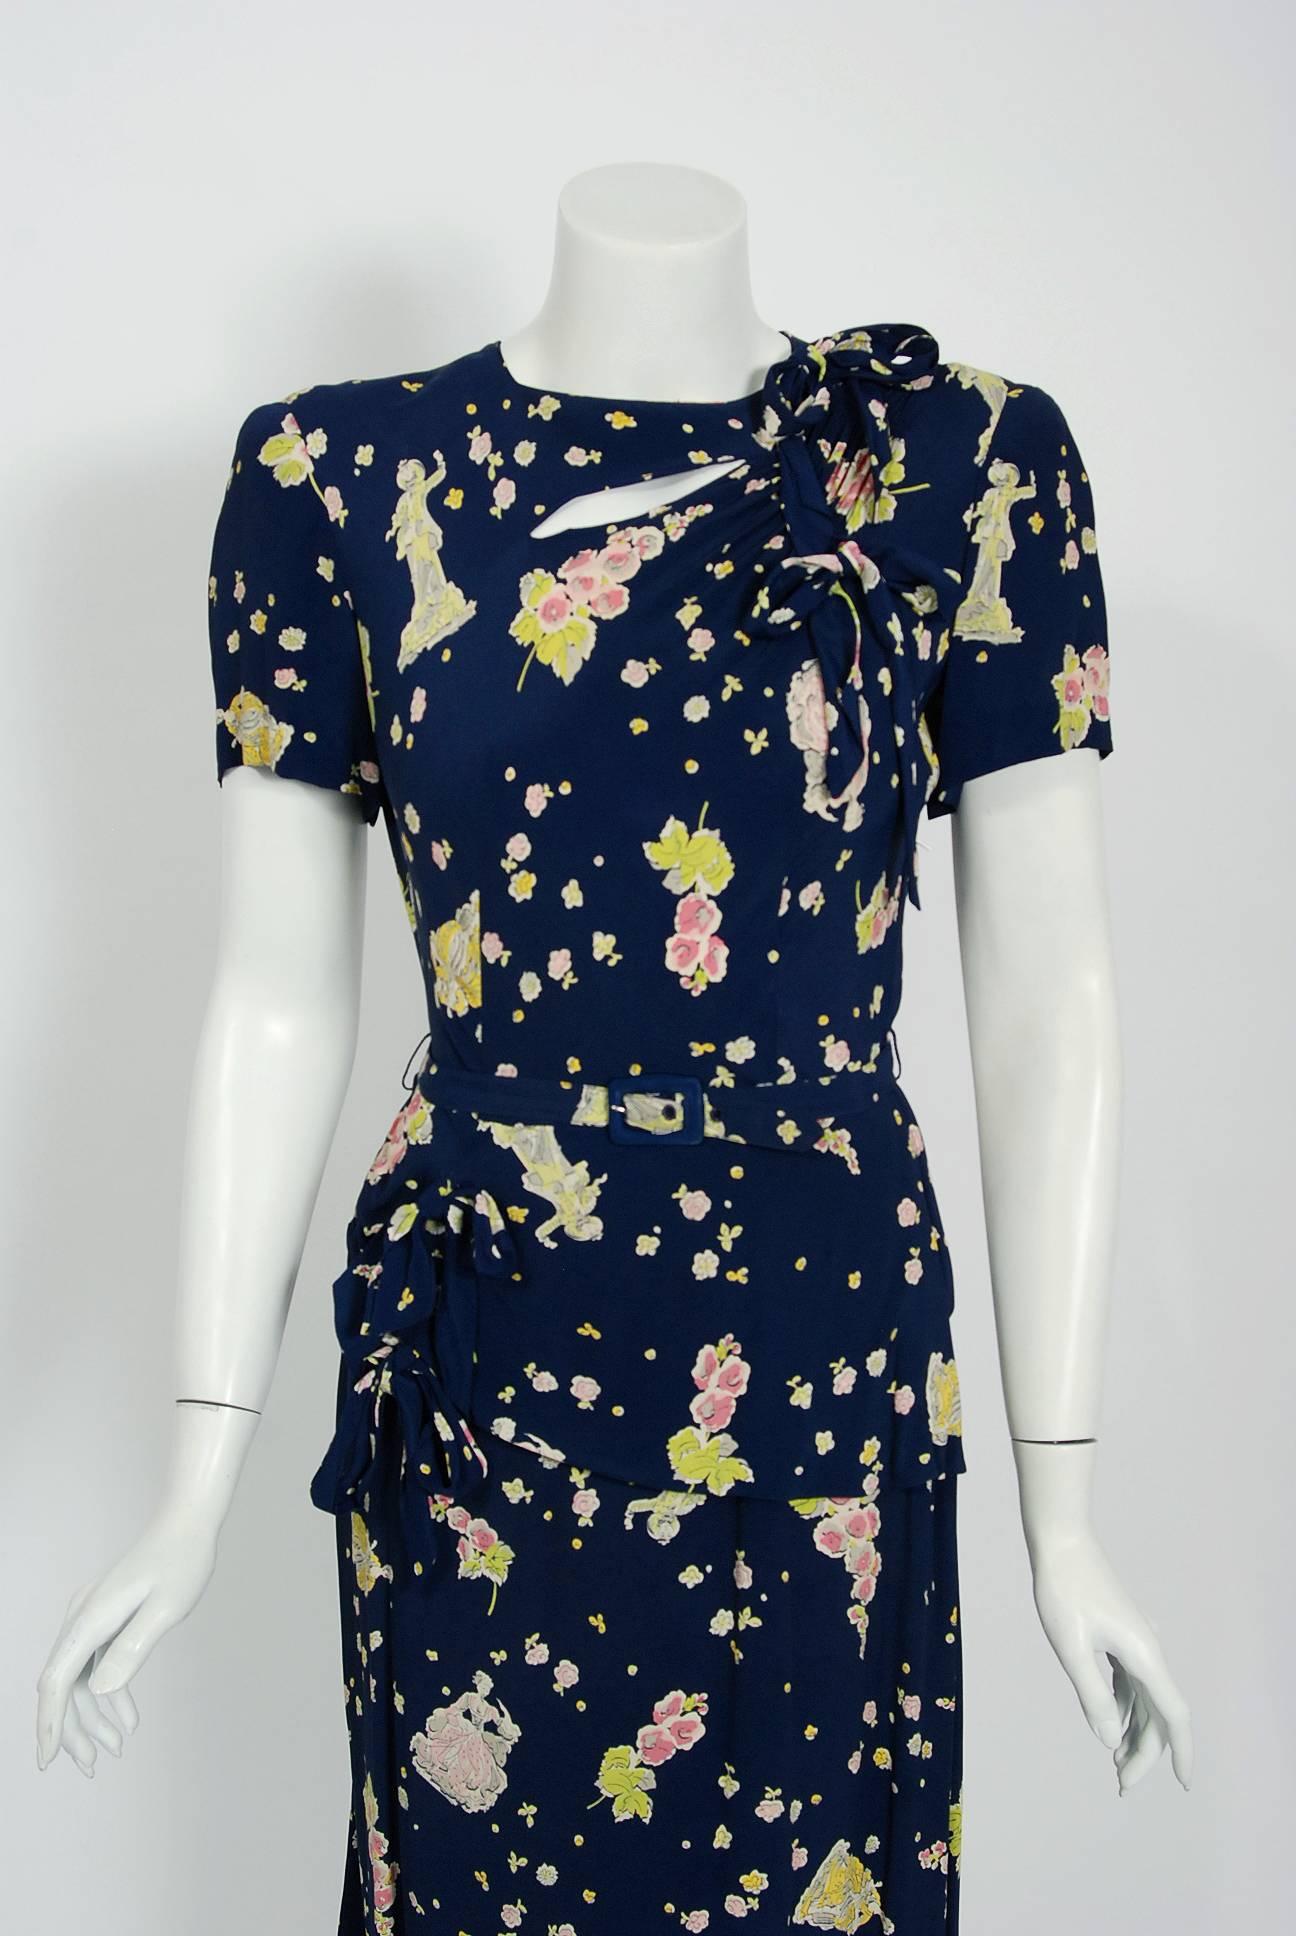 With its adorable Victorian dolls scenic novelty print and flawless styling, this Trudy Hill designer navy-blue rayon dress has the casual elegance the 1940's were known for. The short sleeve asymmetric cut-out bow trimmed bodice is very flattering